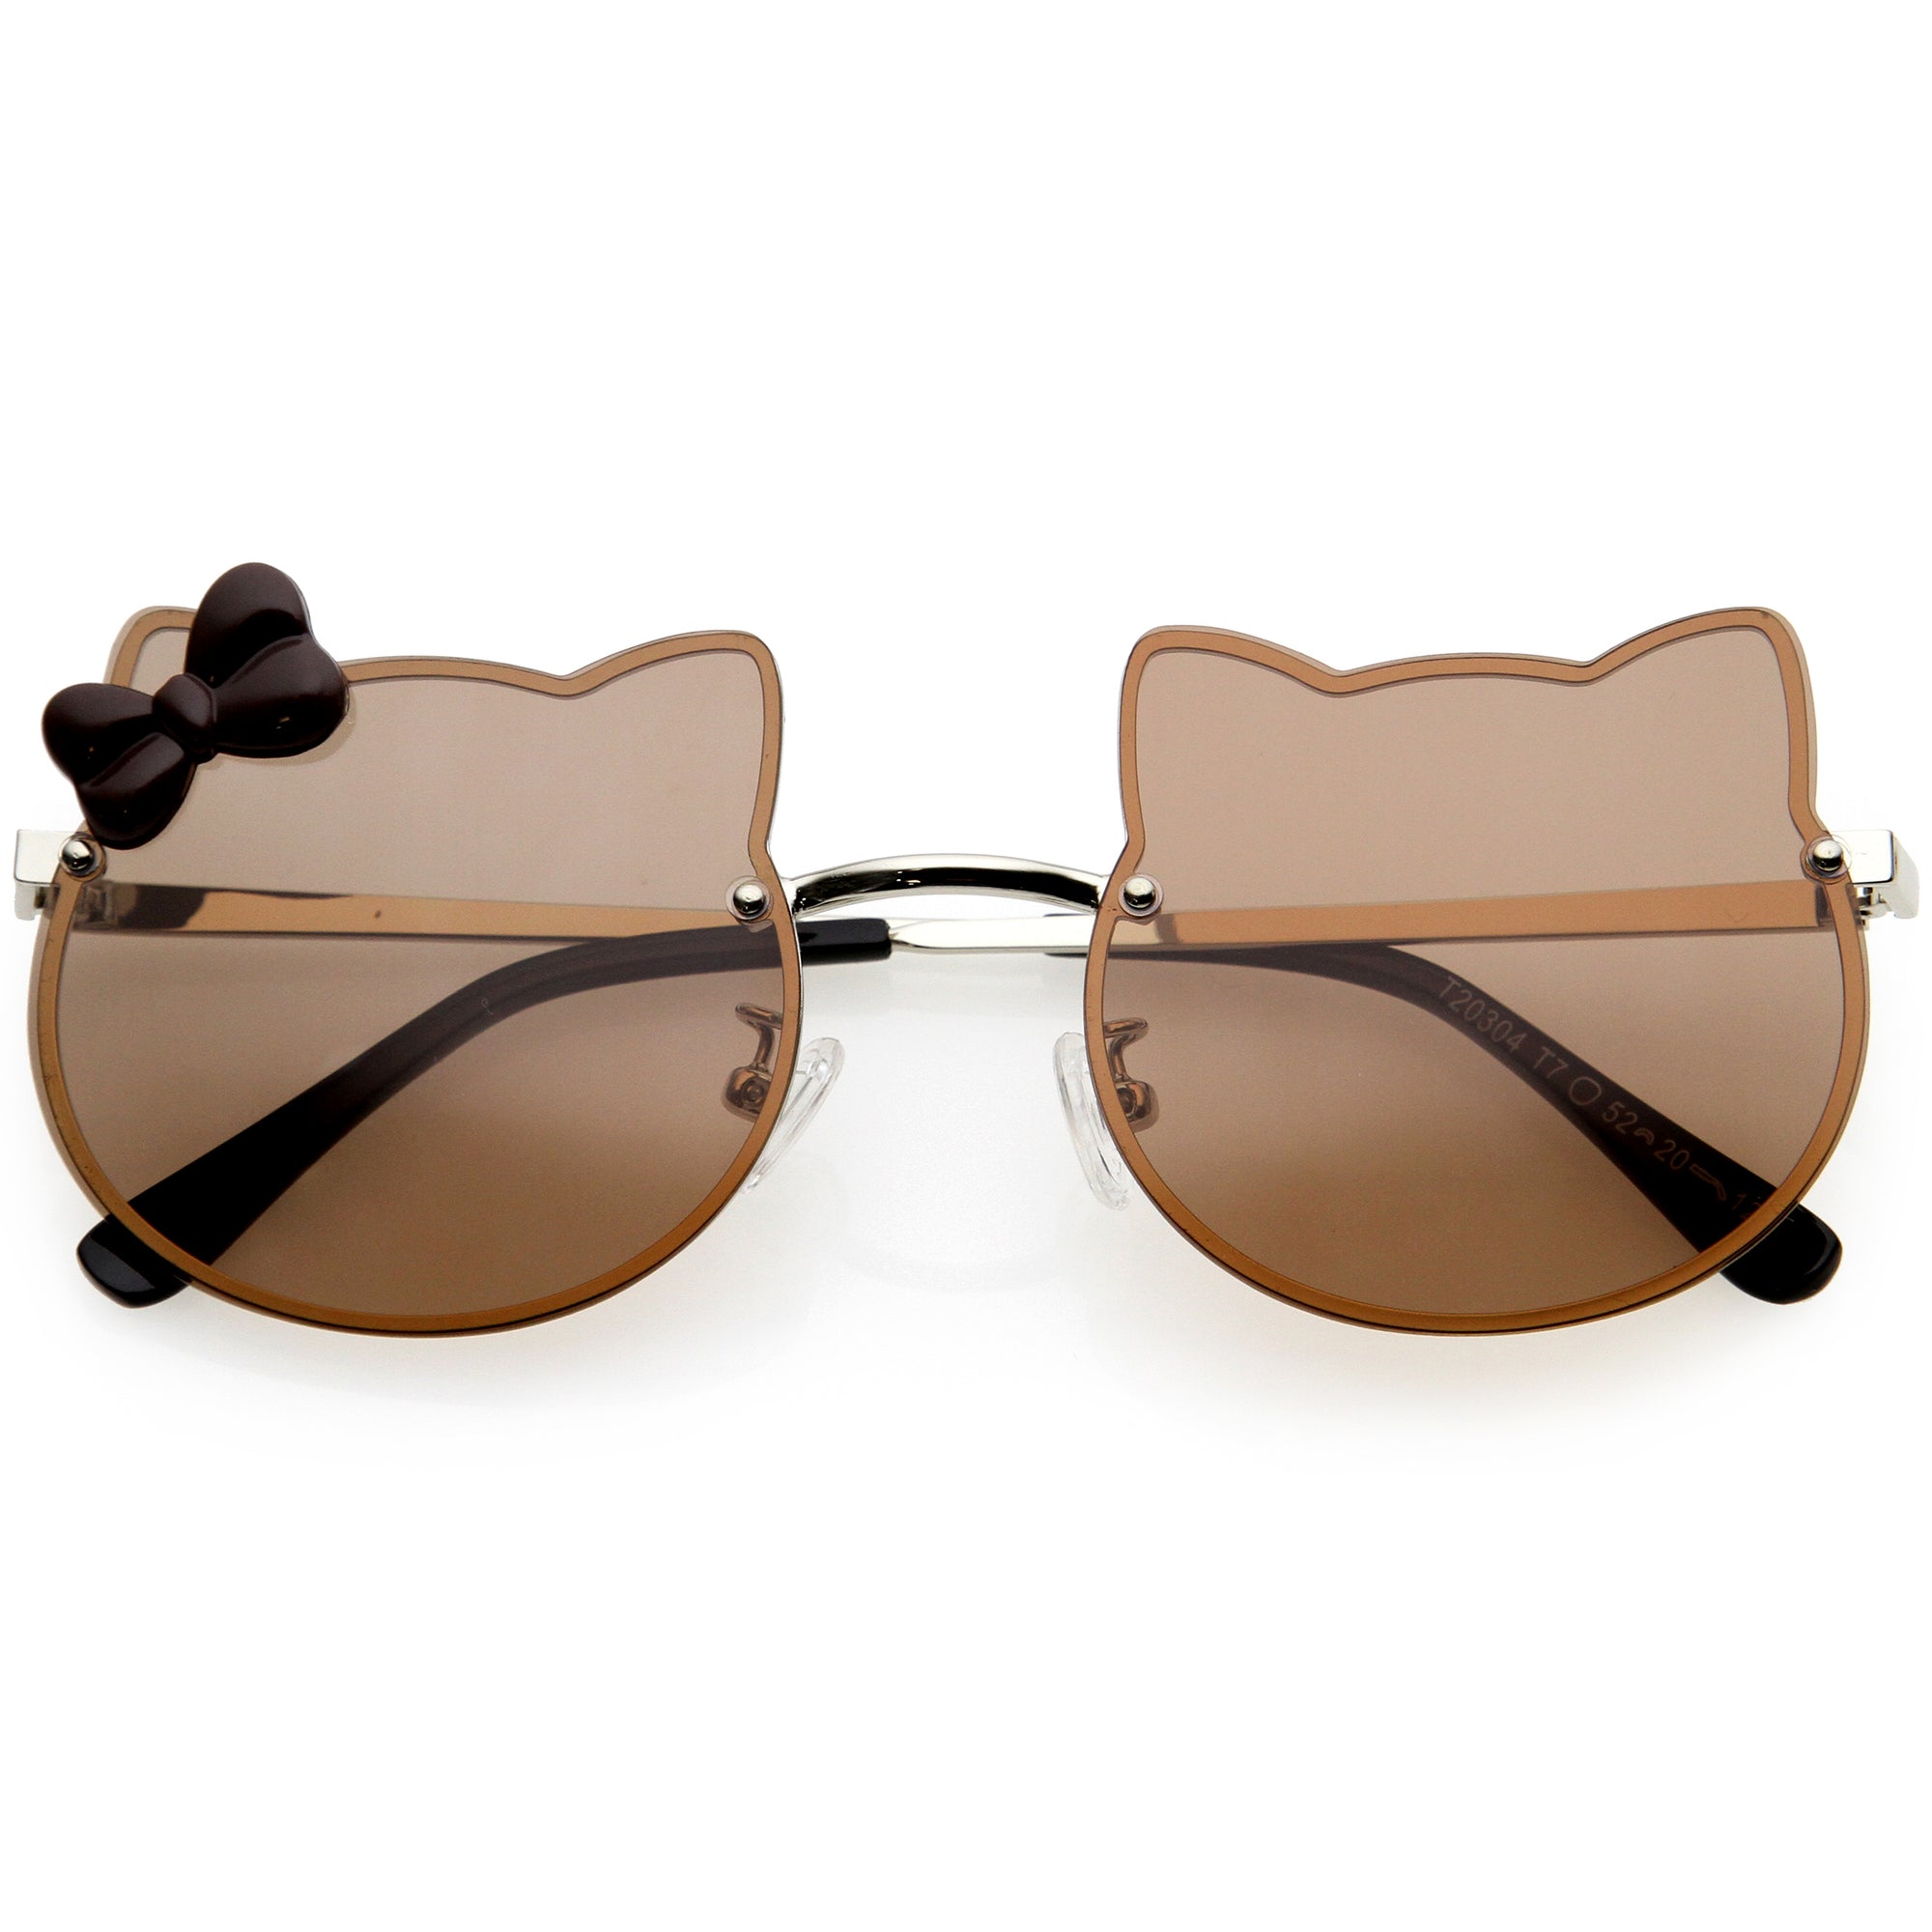 Kids Cute Bow Accented Metal Girls Cat Shaped Sunglasses D238